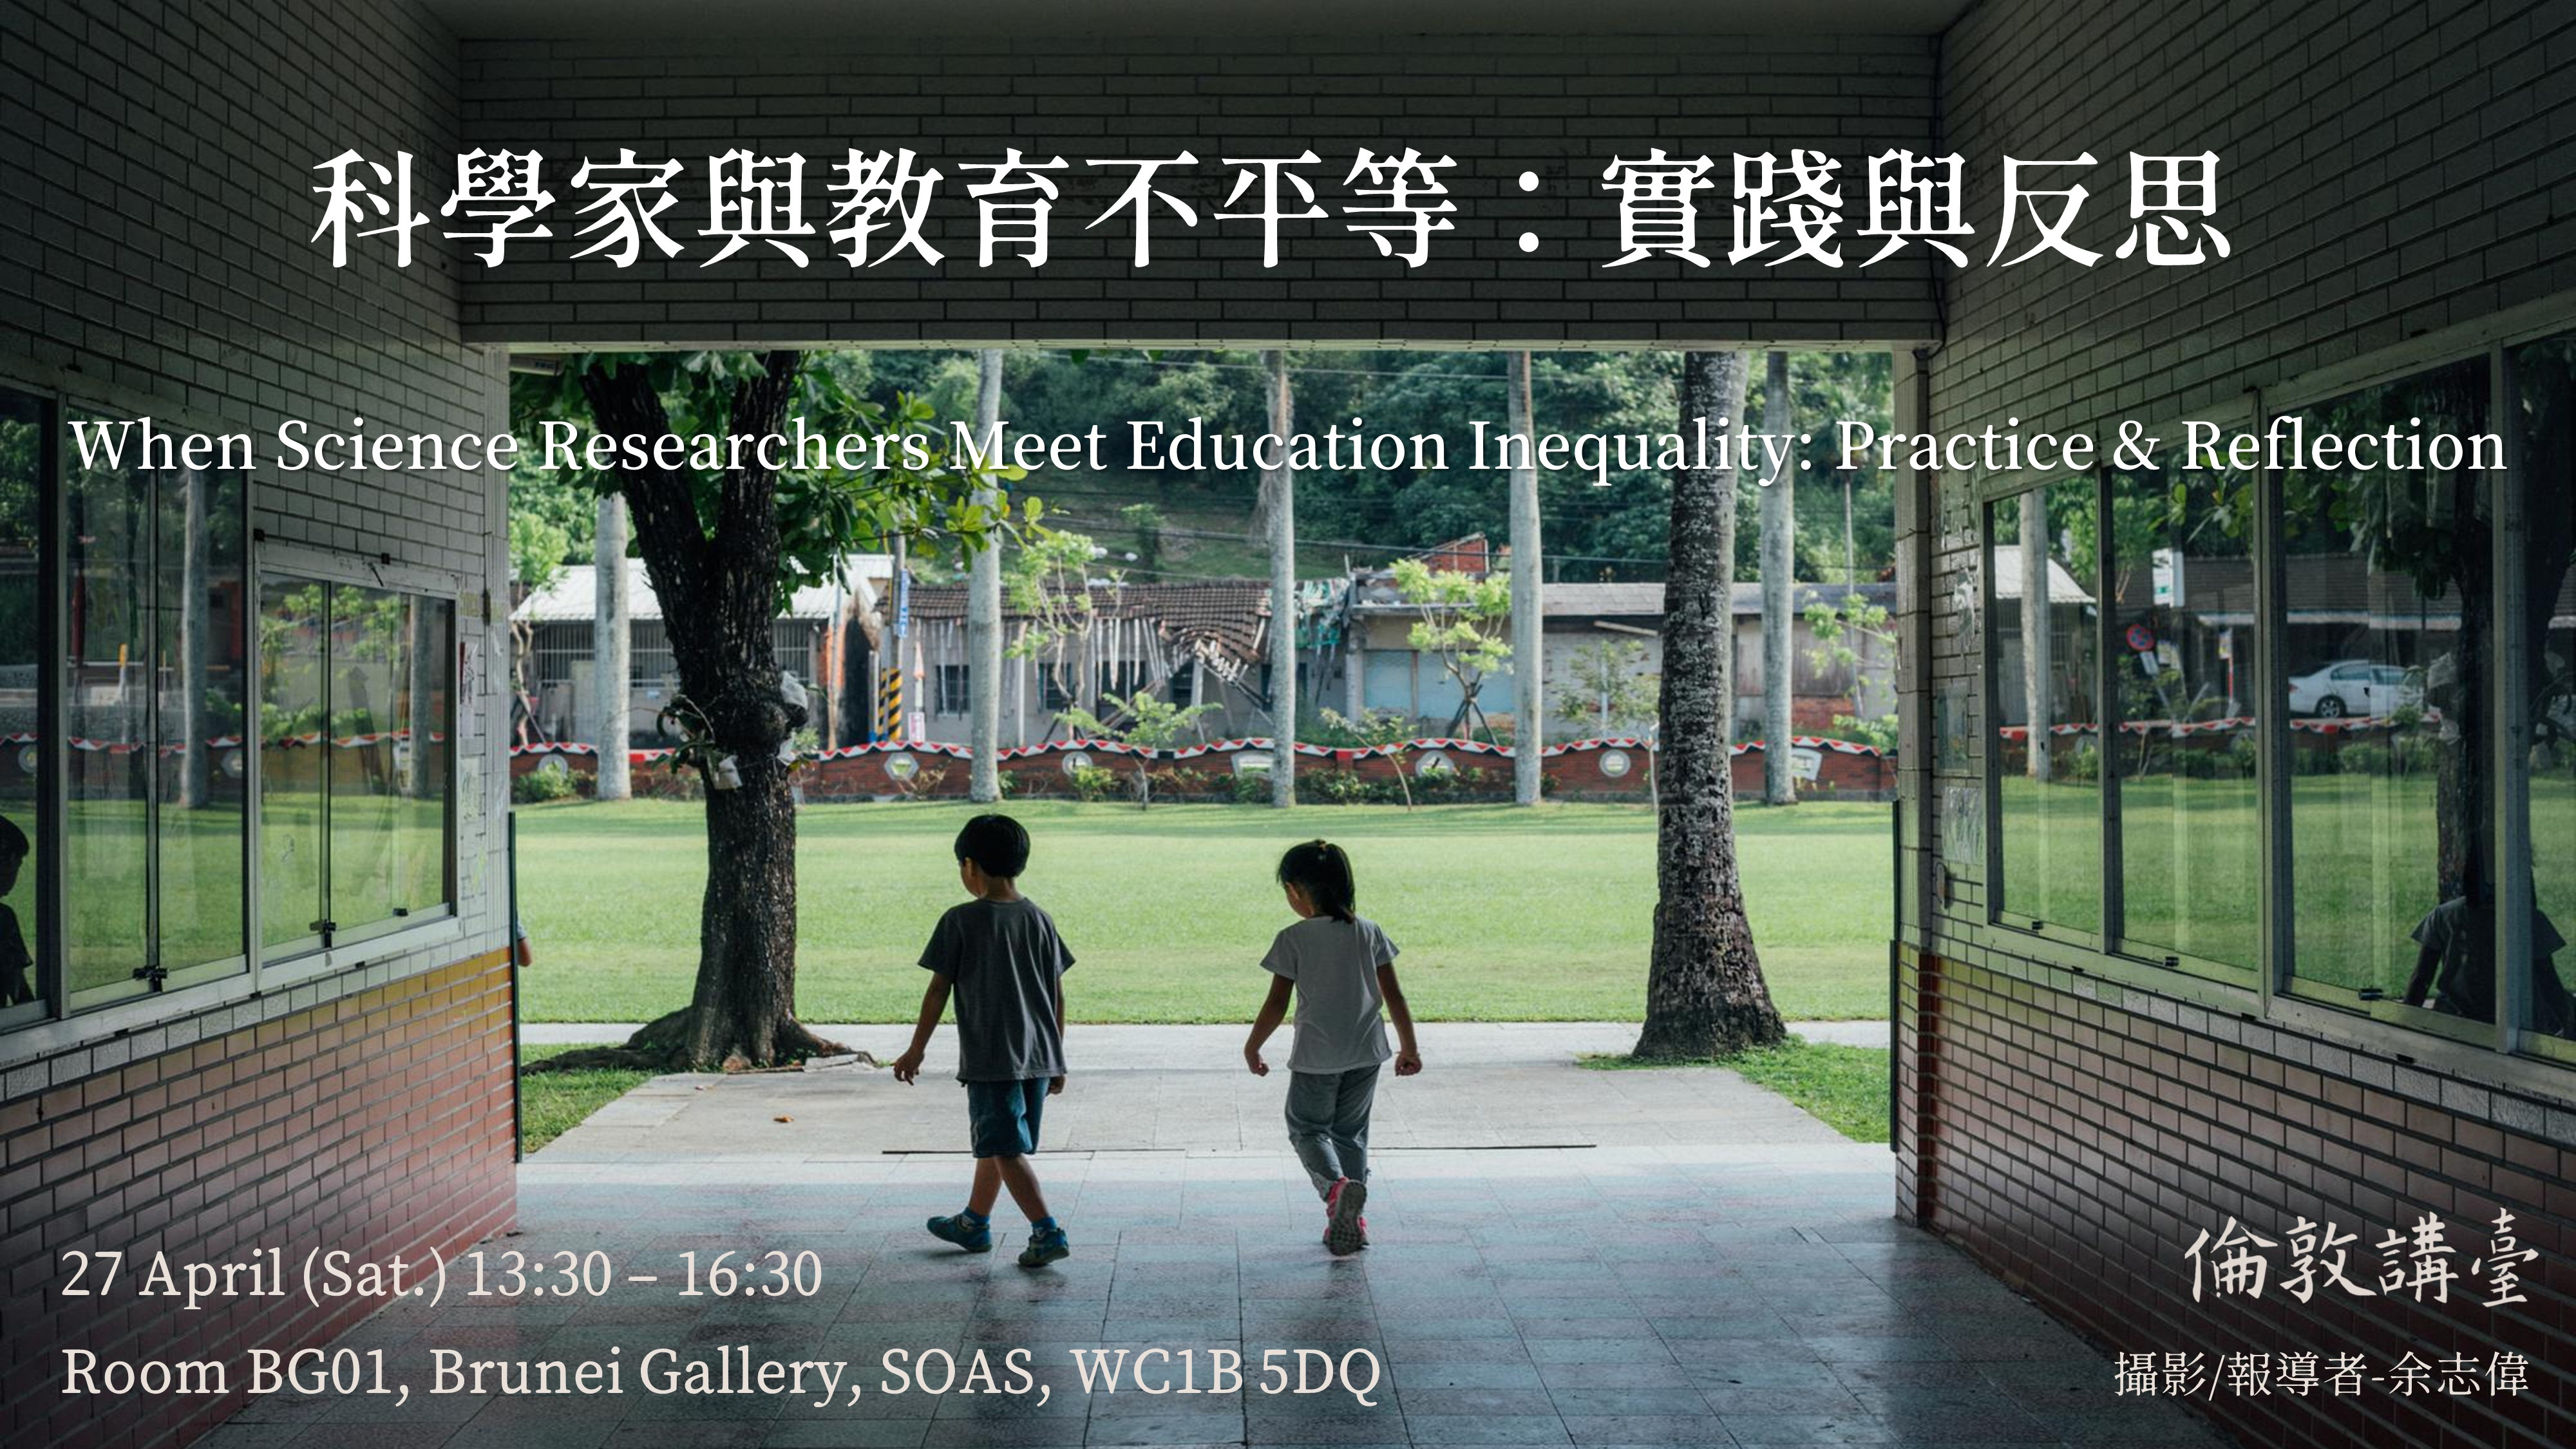 image from 科學家與教育不平等——實踐與反思 | When Science Researchers Meet Education Inequality: Practice & Reflection